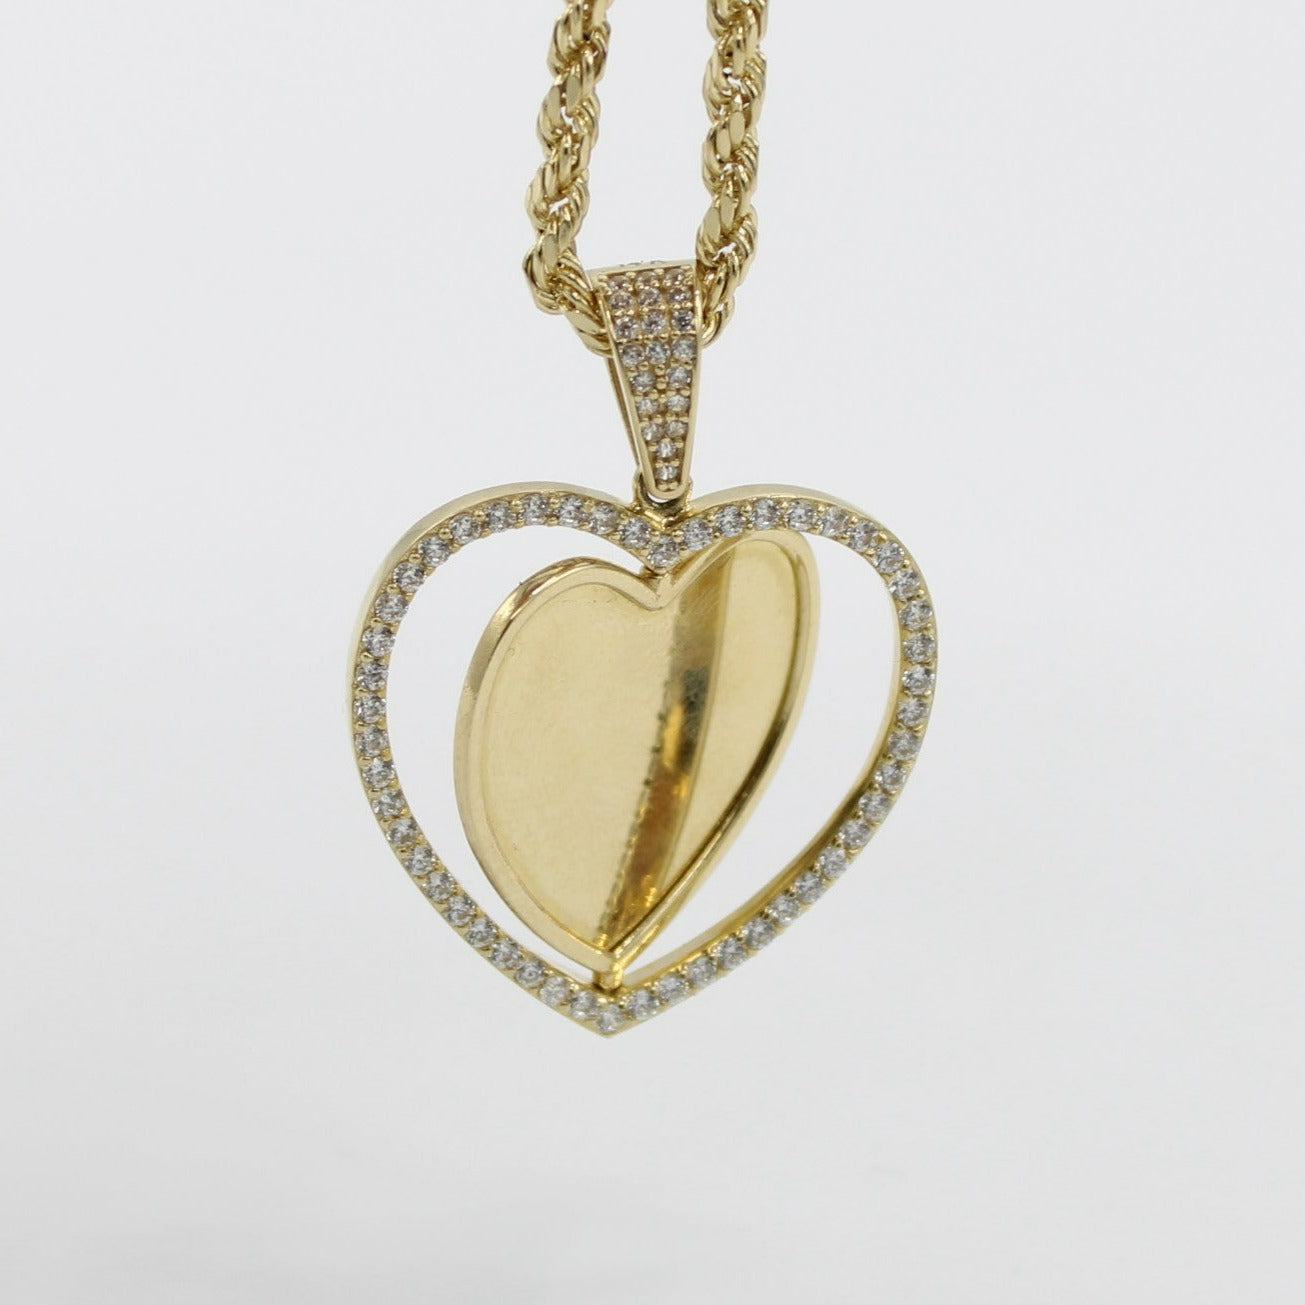 14k  Heart Picture Pendant Cz Stones with Rope Chain Yellow Gold